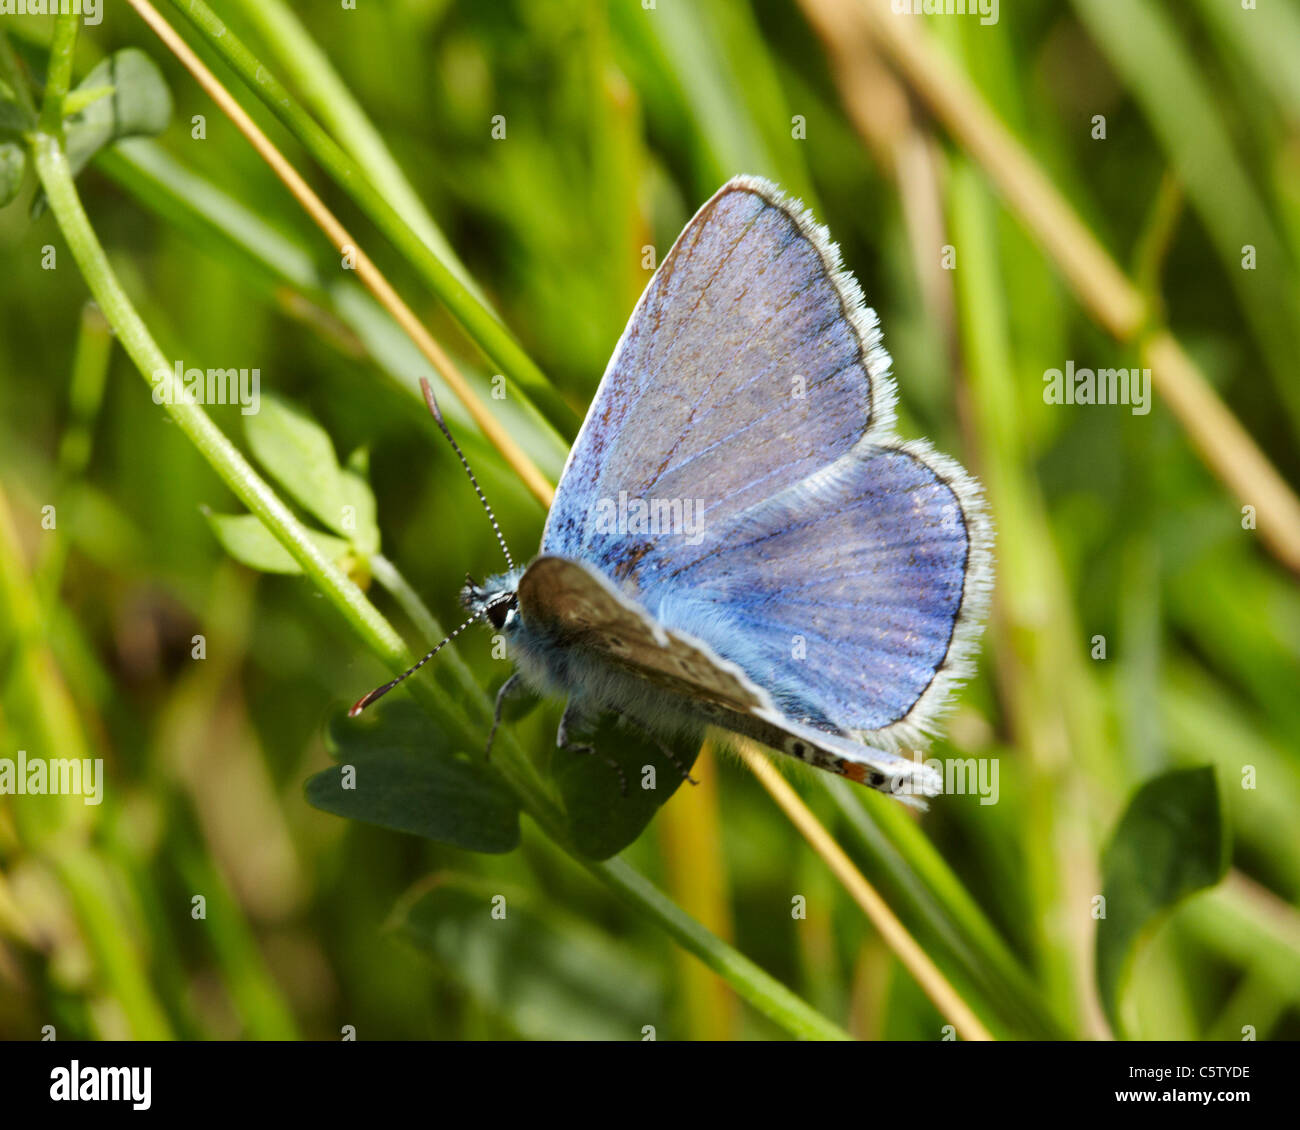 Common Blue butterfly. Hurst Meadows, West Molesey, Surrey, England. Stock Photo